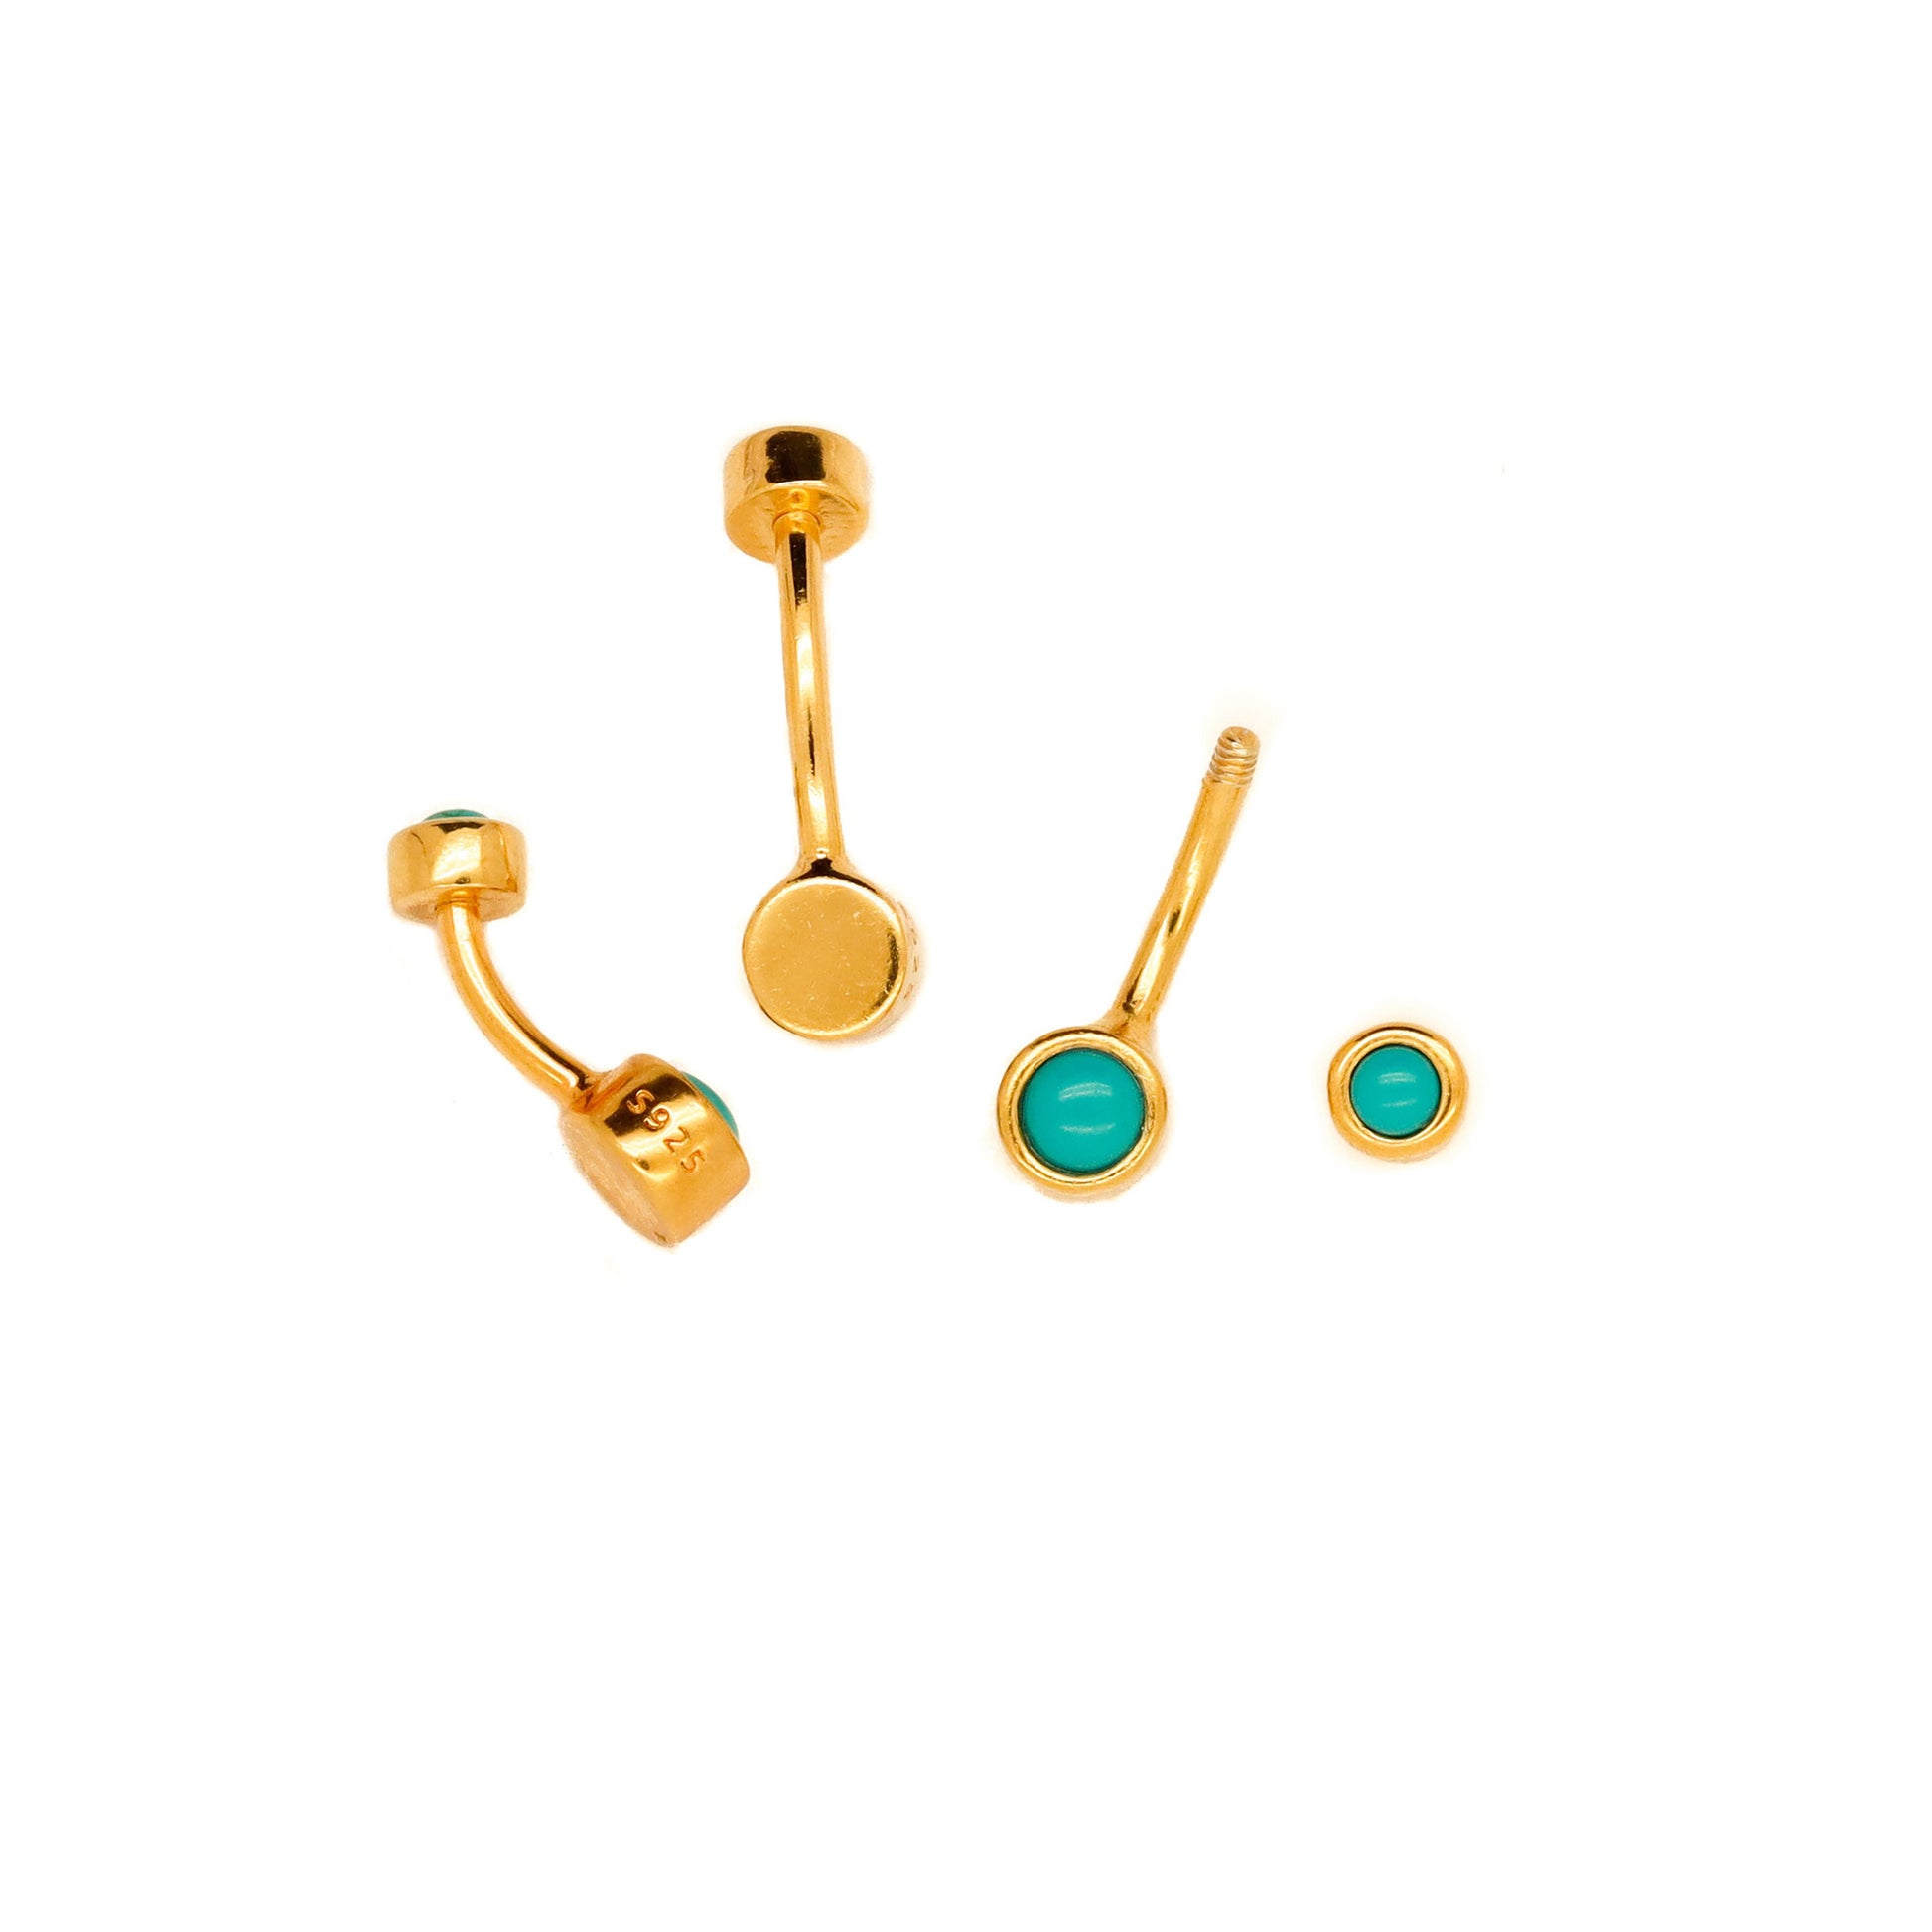 Vermeil | 24k Gold Coated 925 Silver 14G Tiny Blue Turquoise Belly Ring | 6mm 1/4" 8mm 5/16" 10mm 3/8" - Sturdy South